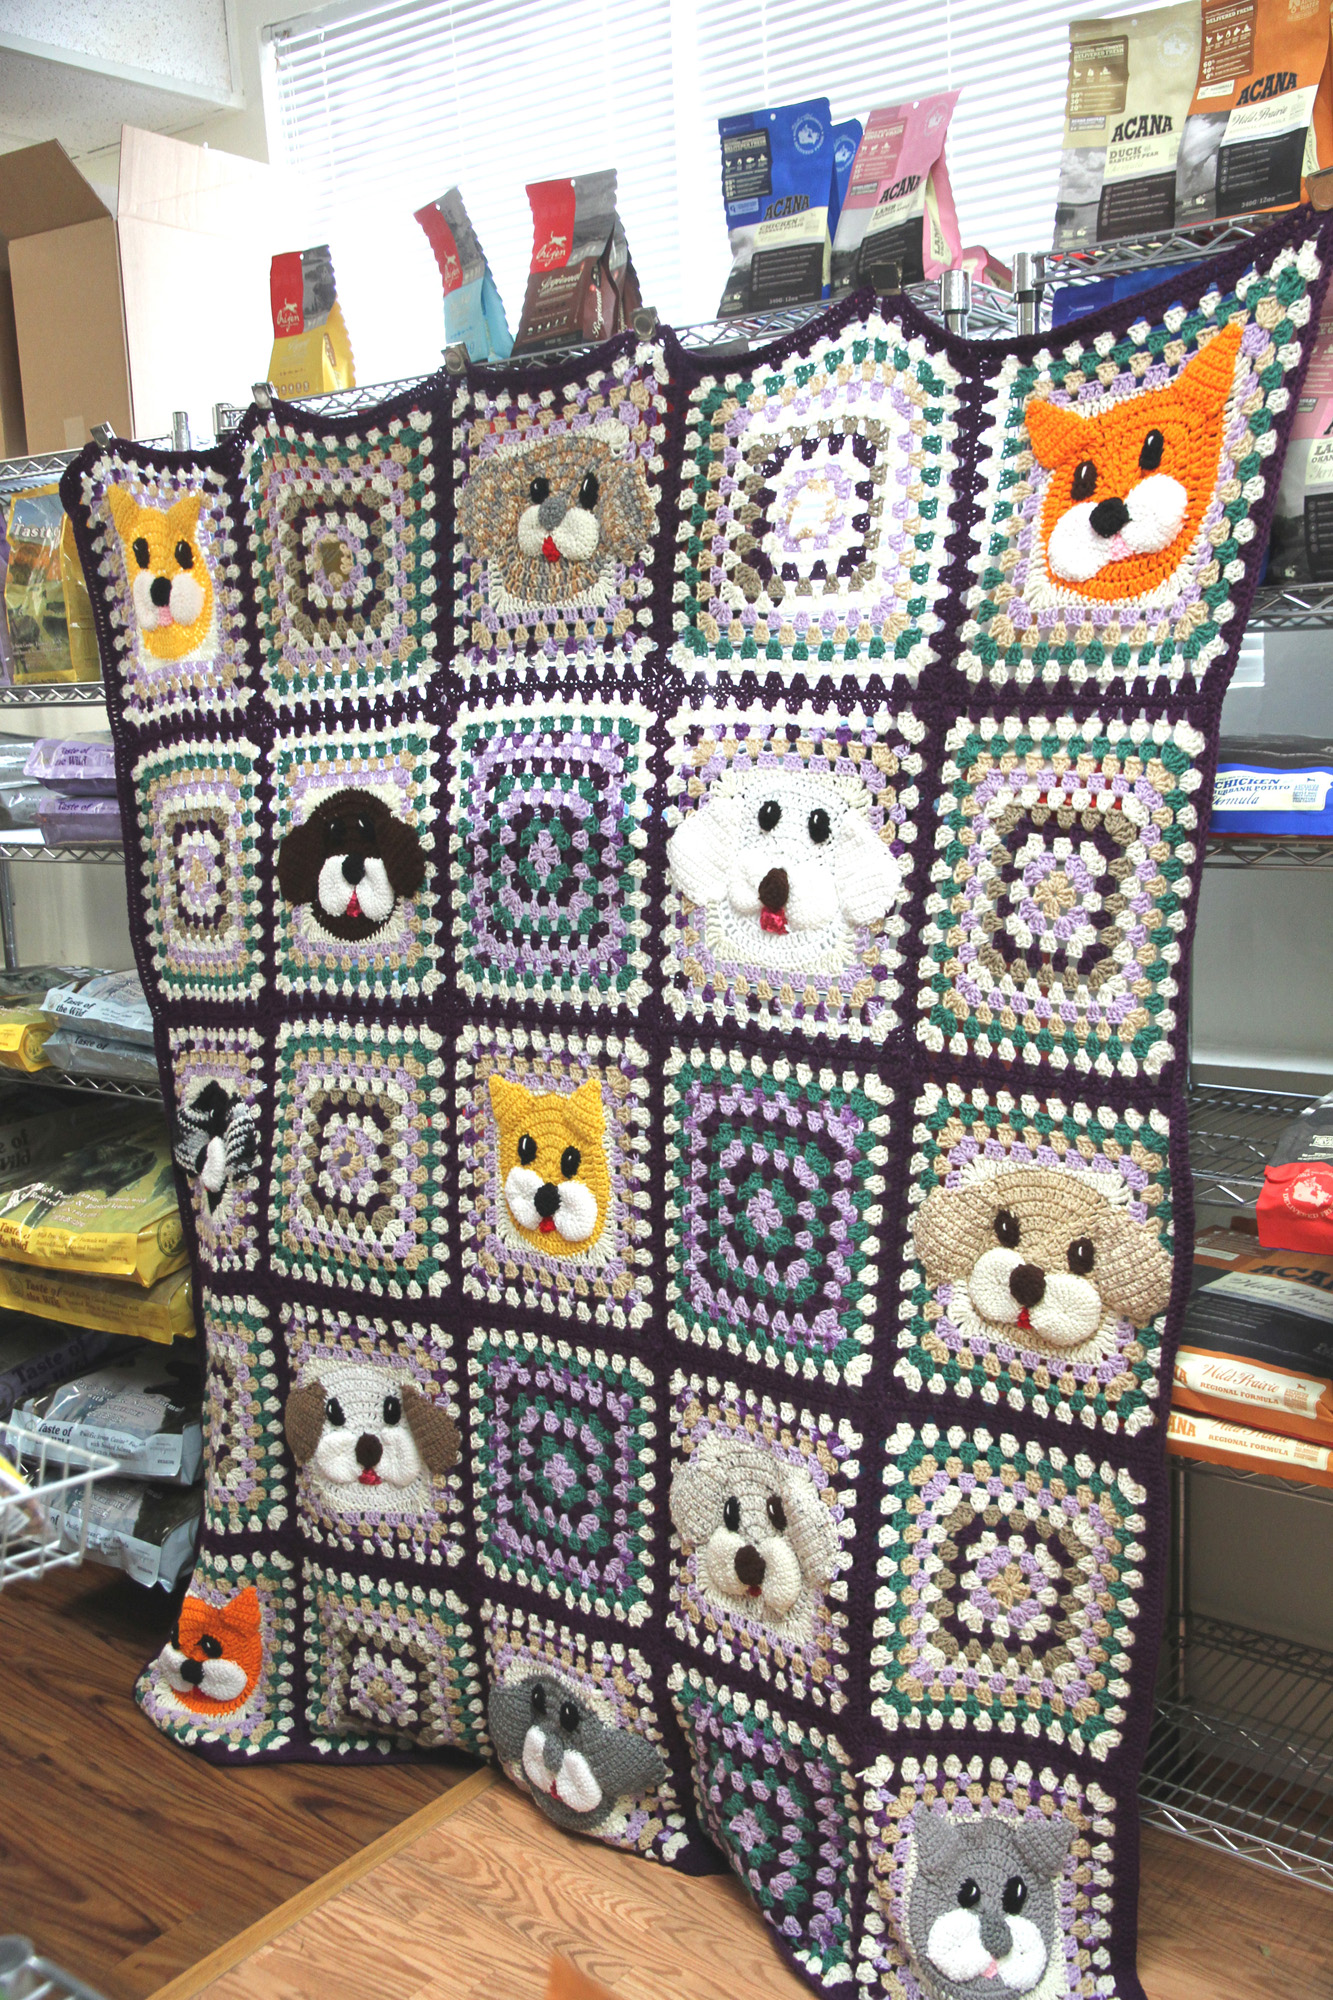 THE QUILT that will be raffled Jan. 25 was stitched by Tish Bilby. Photos by Keri Luiz/Staff